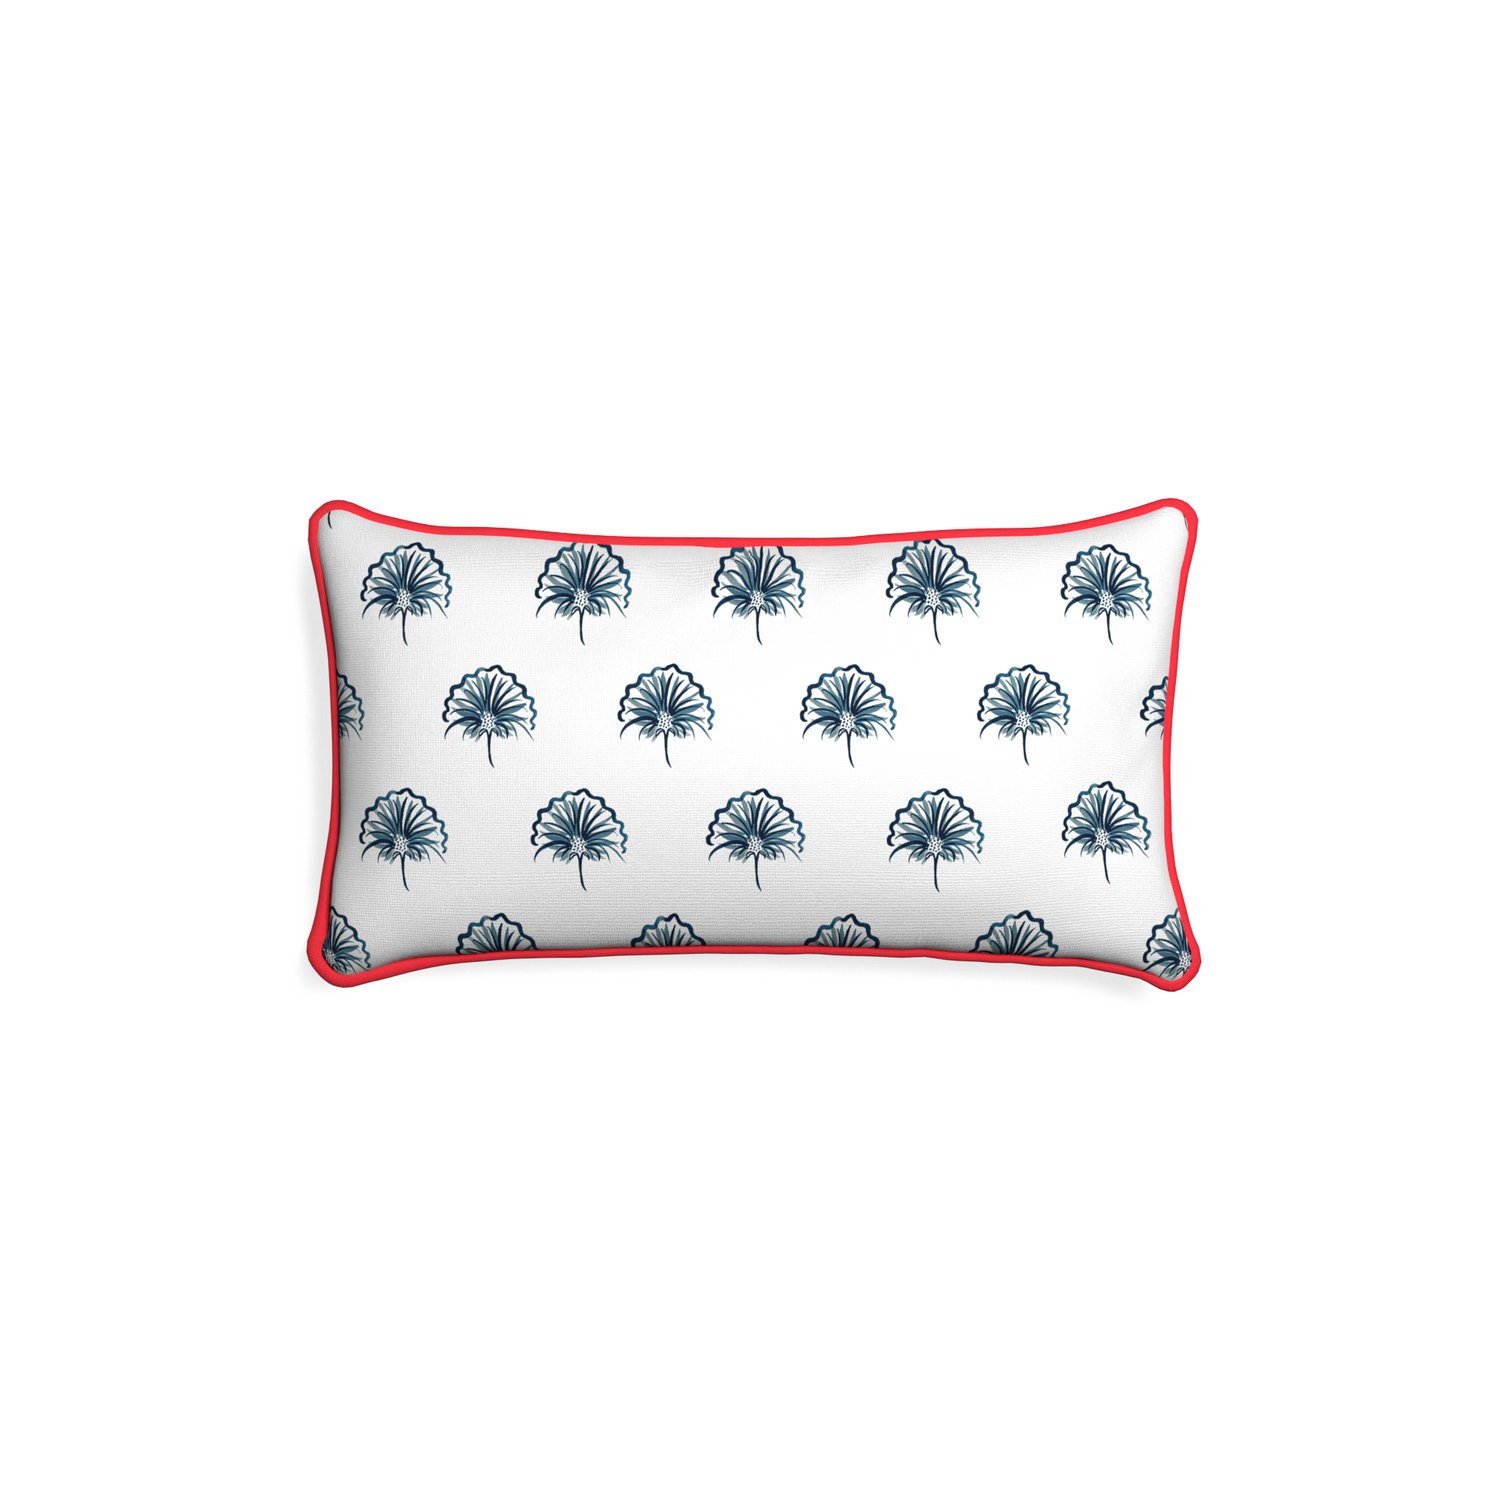 Petite-lumbar penelope midnight custom floral navypillow with cherry piping on white background